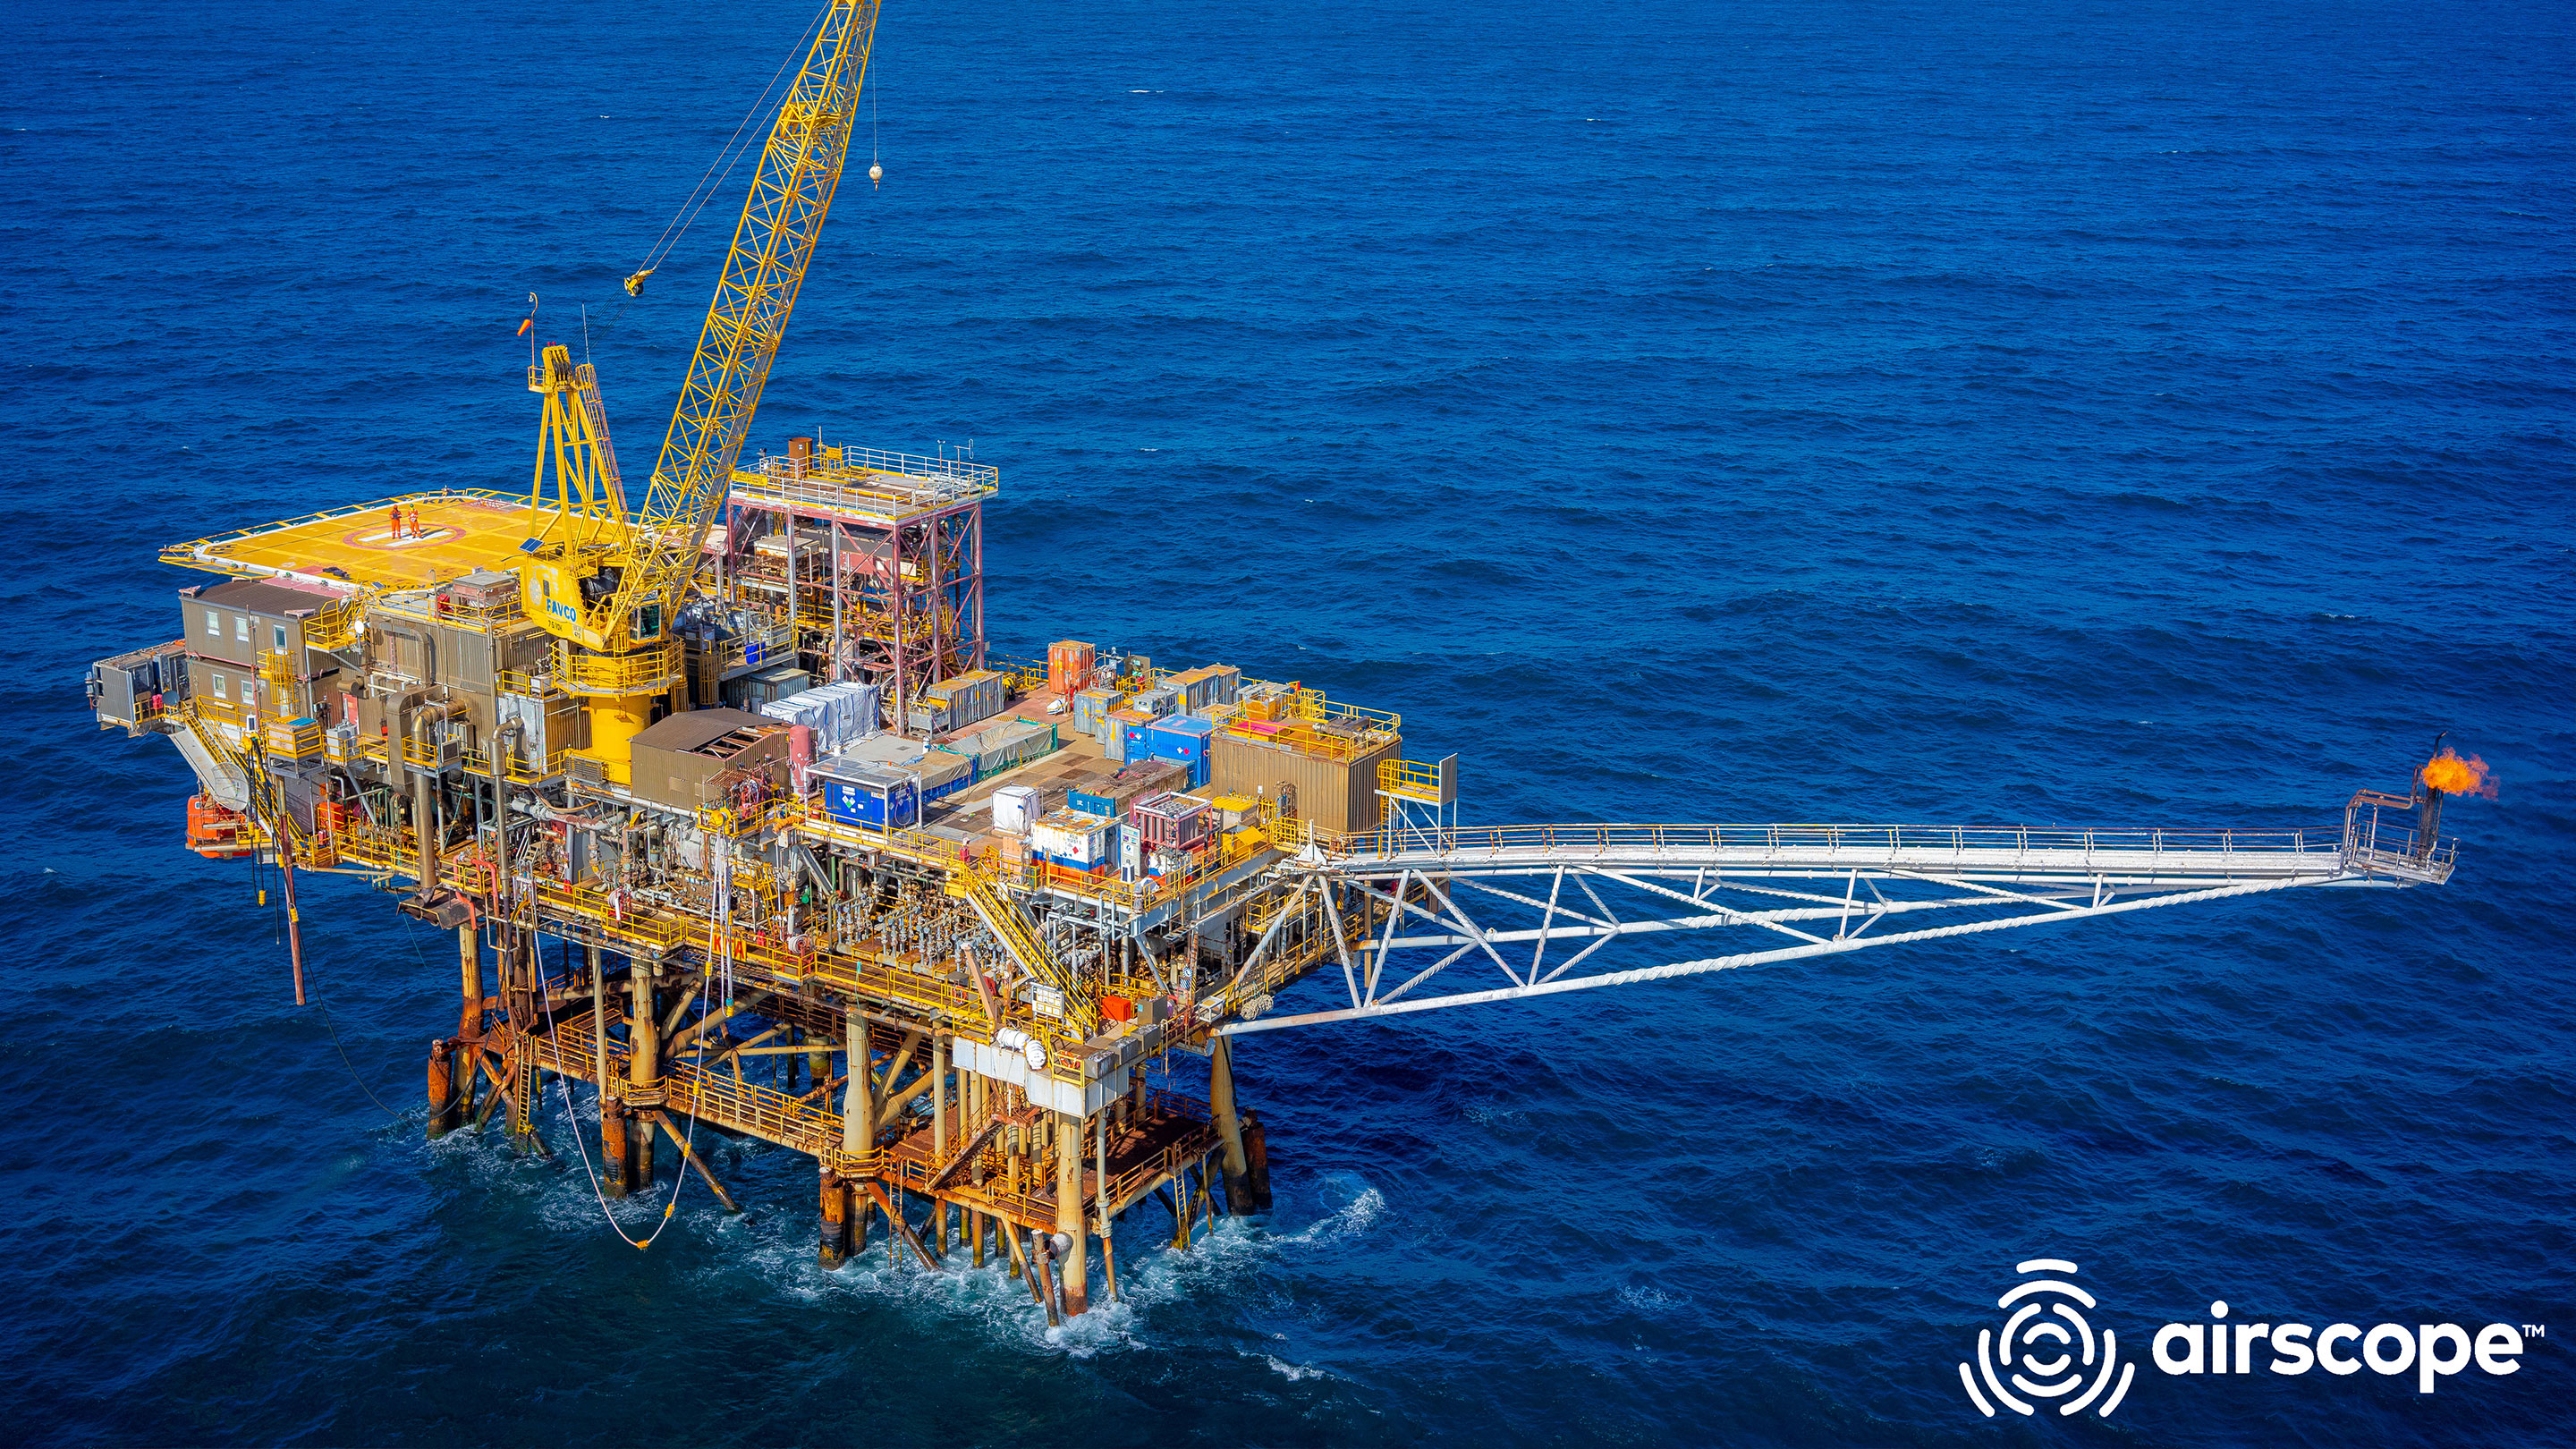 Image An image of the Kingfish A platform in Bass Strait captured by an Airscope drone as part of Esso Australia's campaign to build 3D digital models of some of our offshore facilities.